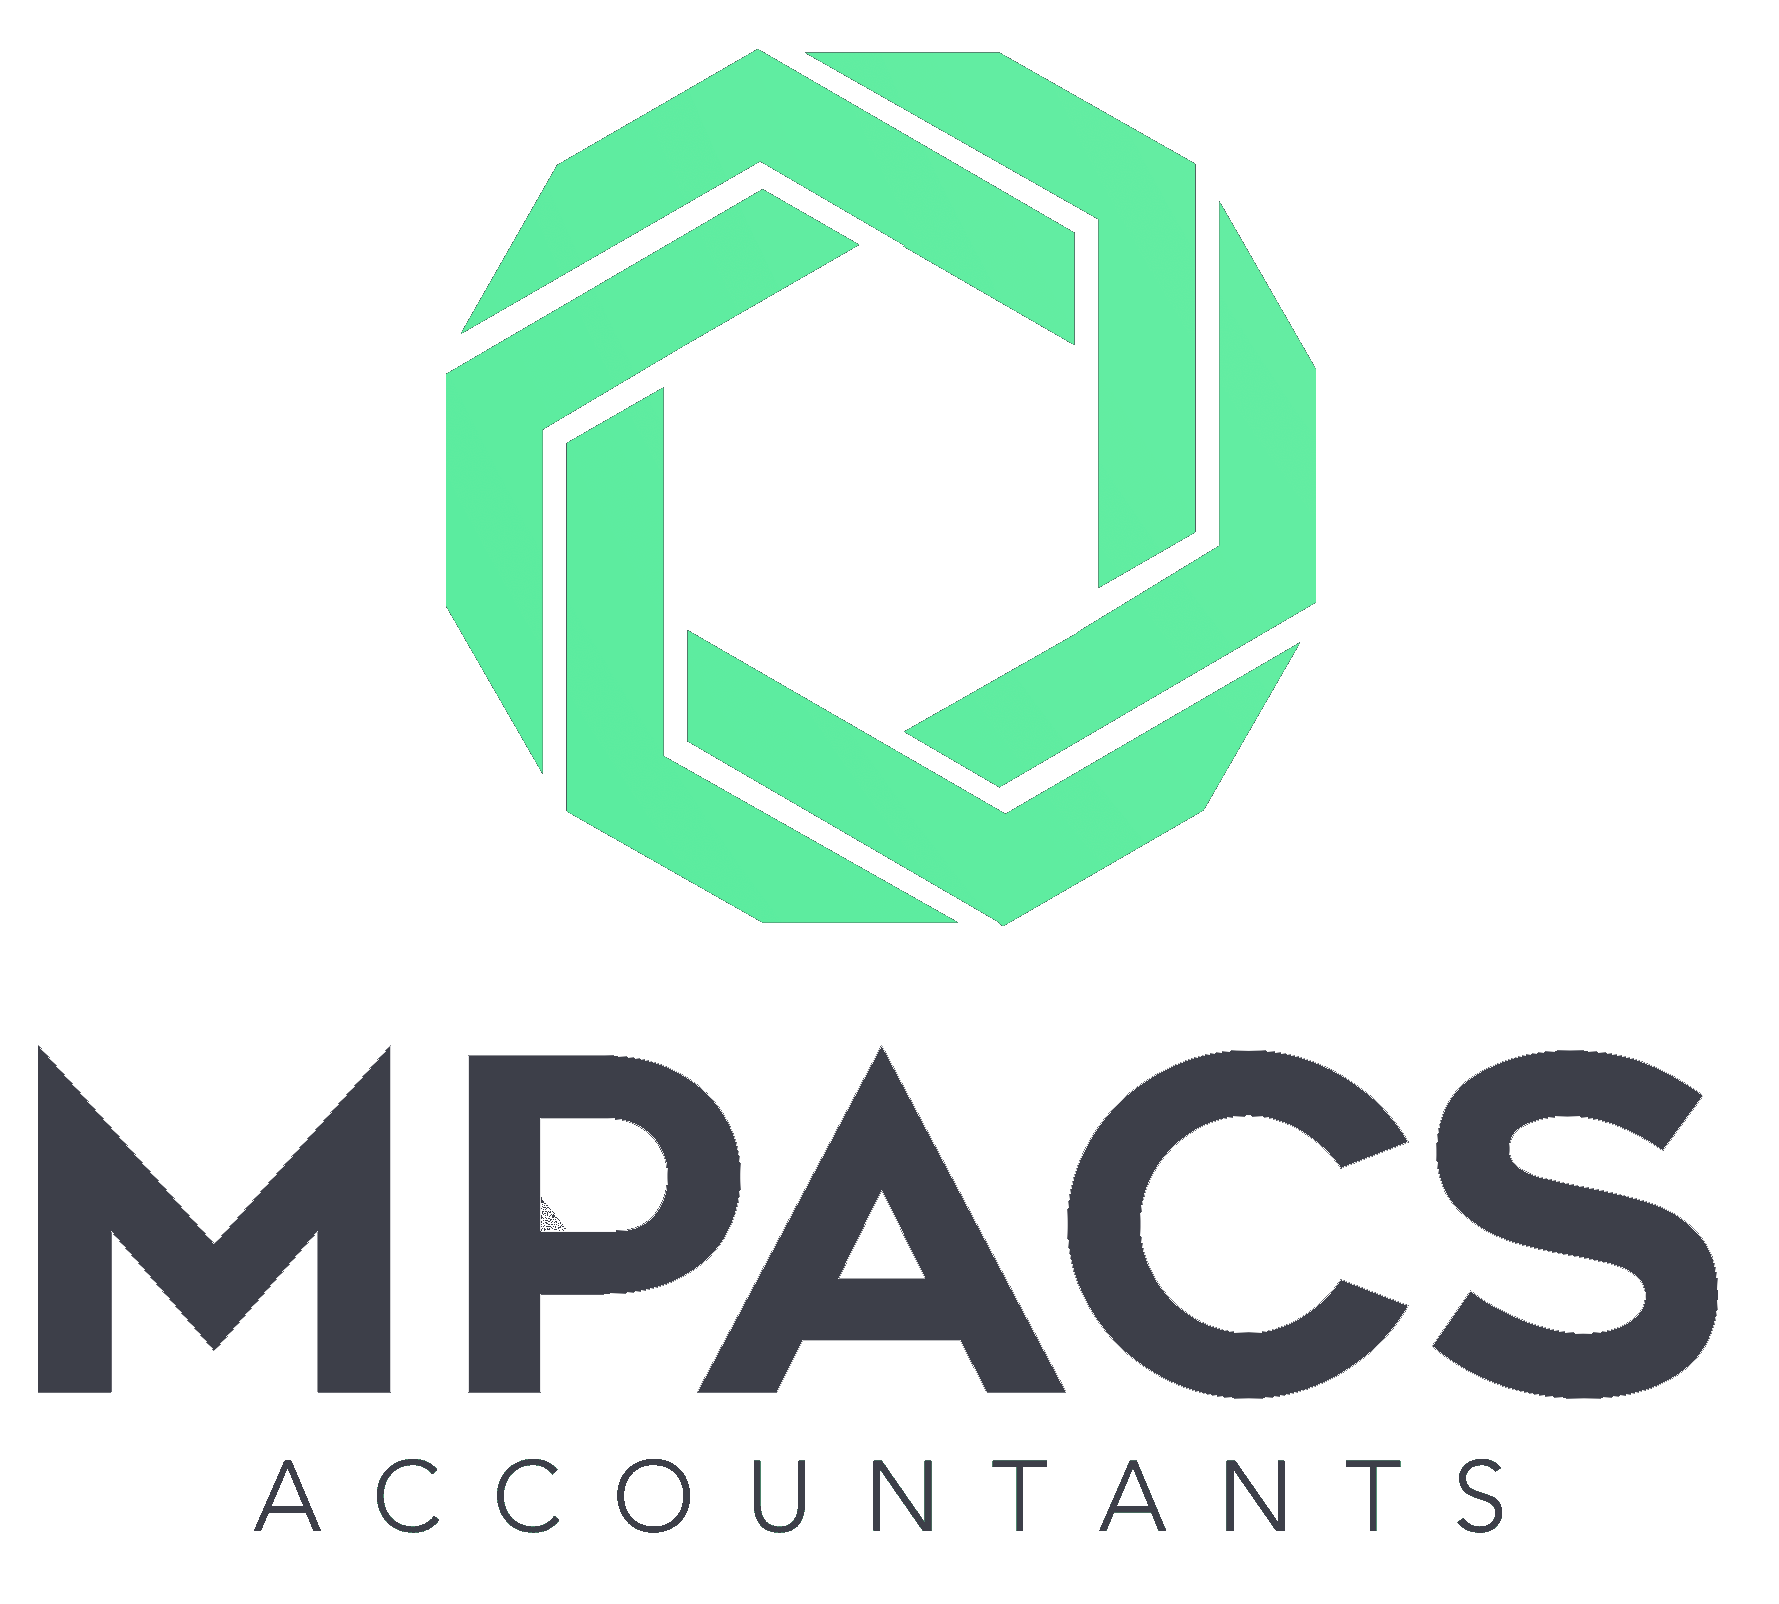 Market Place Accounting Services